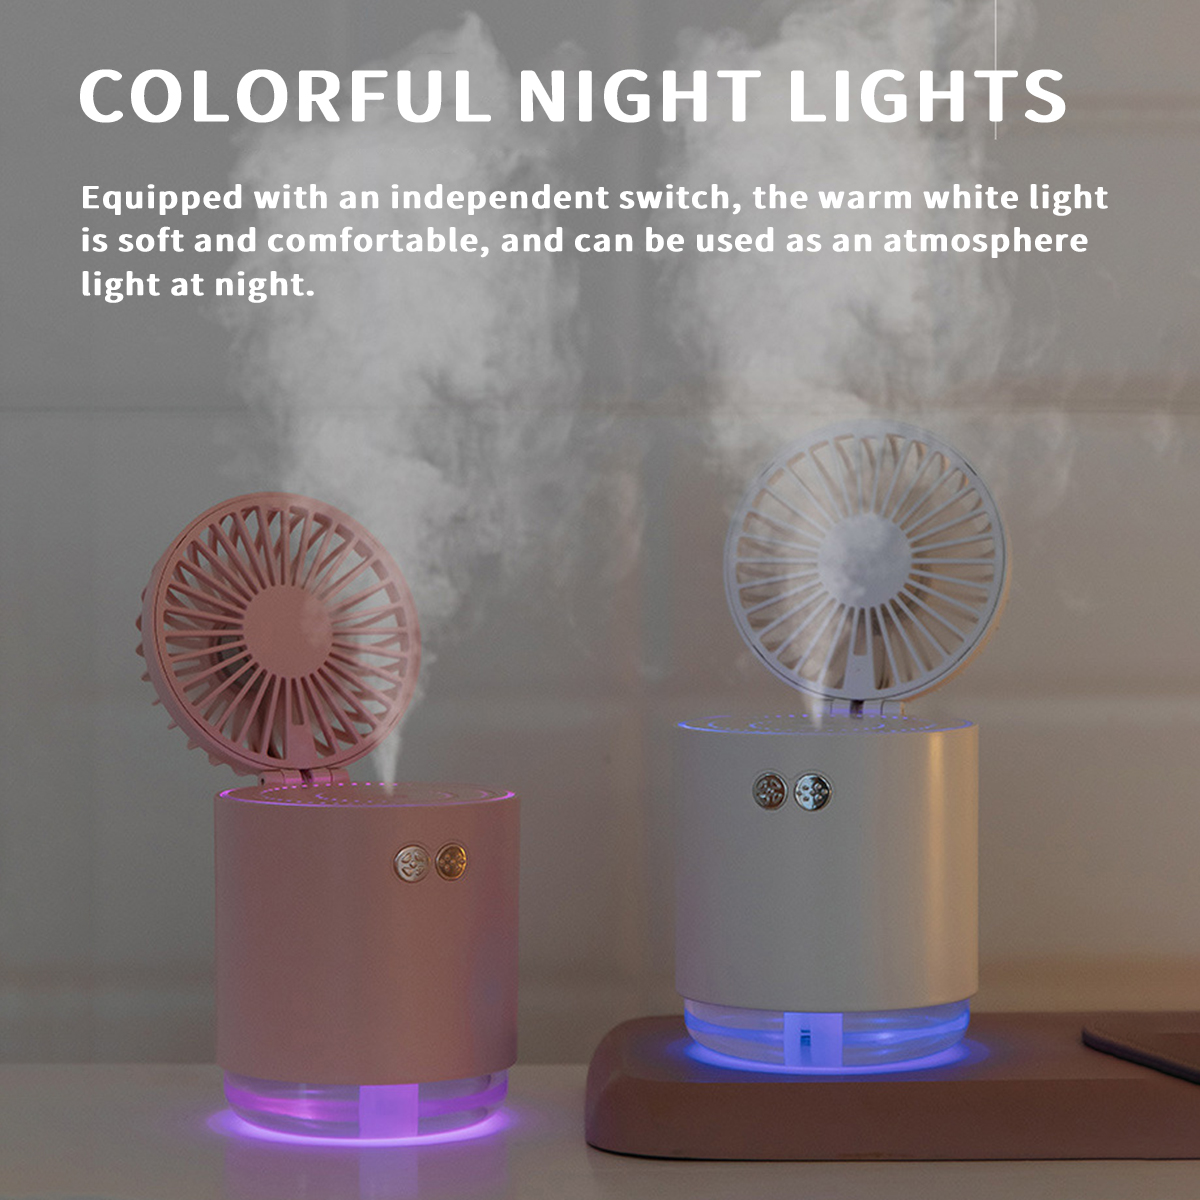 Multifunctional-2000mAh-Mini-USB-Rechargeable-Fan-Cooler-Desktop-Spray-Humidification-with-Colorful--1864518-14